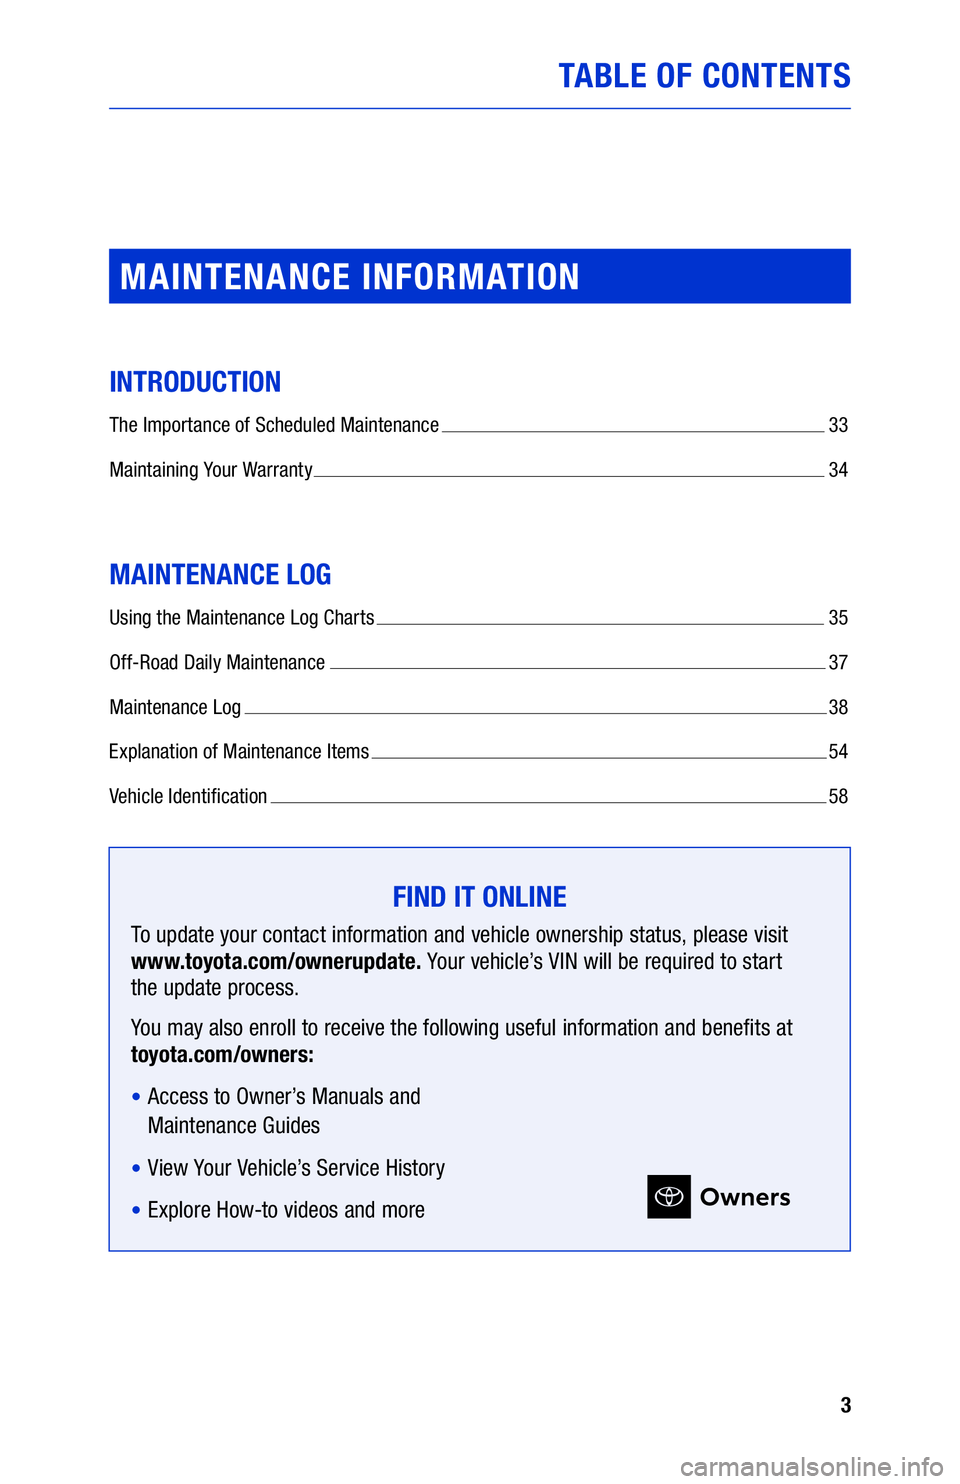 TOYOTA LAND CRUISER 2020  Warranties & Maintenance Guides (in English) 3
TABLE OF CONTENTS
MAINTENANCE INFORMATION
INTRODUCTION
The Importance of Scheduled Maintenance  33
Maintaining Your Warranty 
  34
MAINTENANCE LOG
Using the Maintenance Log Charts   35
Off-Road Dail